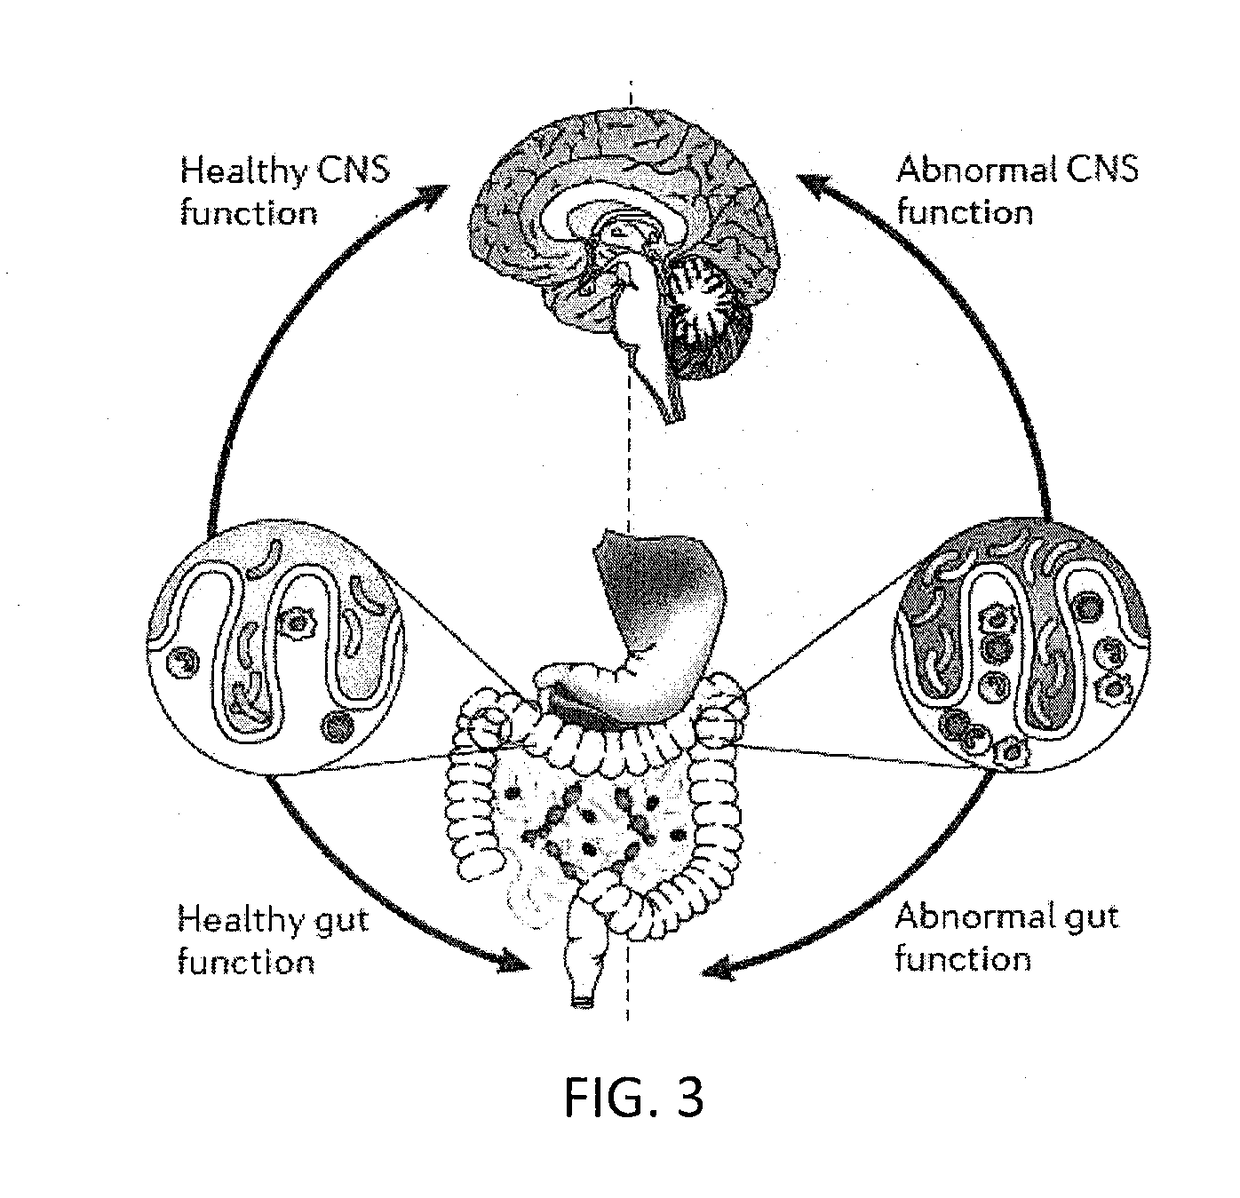 Method and System for Preventing Migraine Headaches, Cluster Headaches and Dizziness